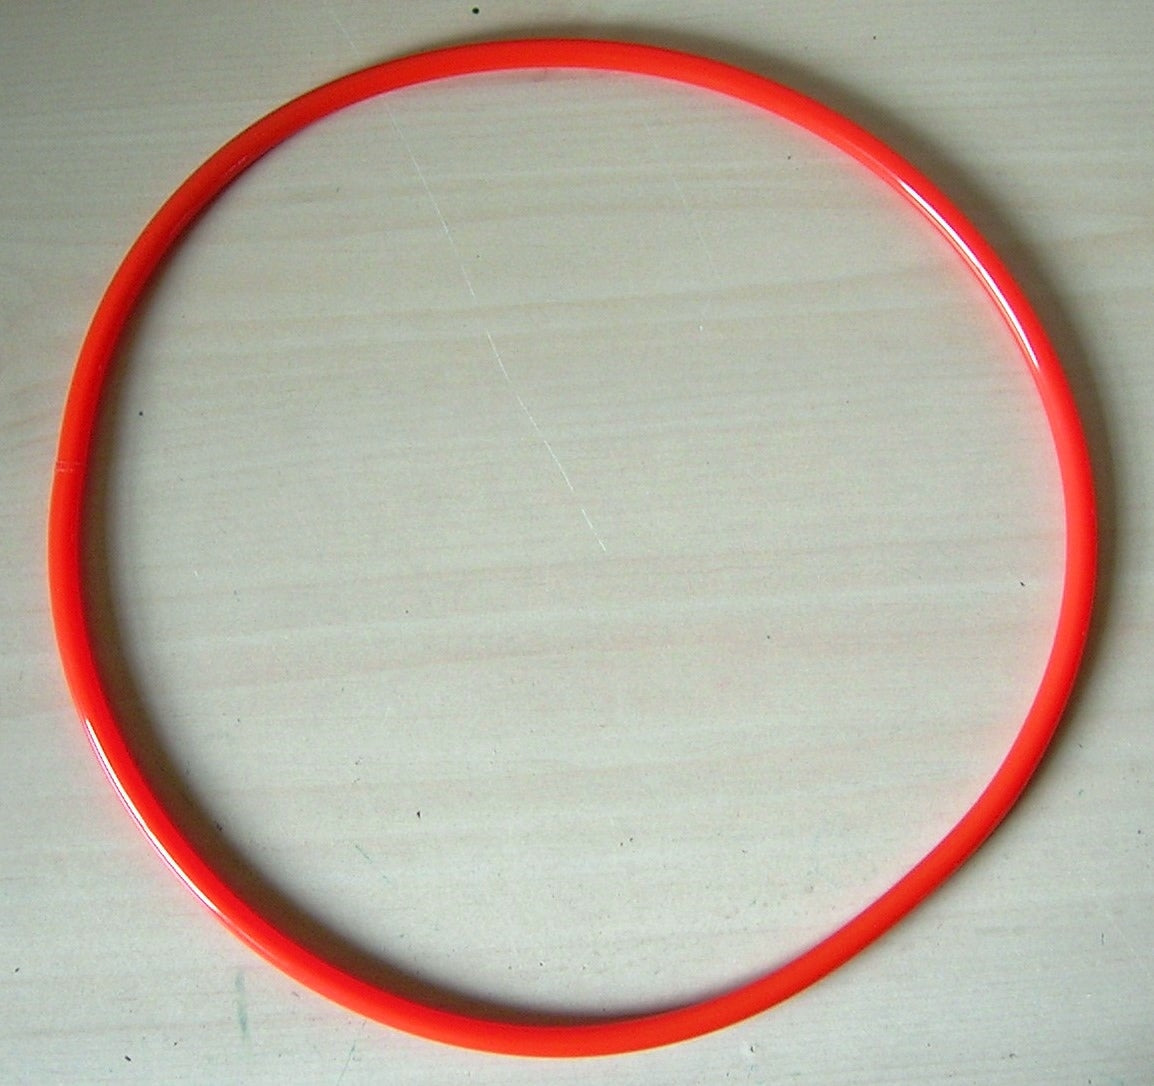 Drive BELT for GRIZZLY G1025 WOOD LATHE